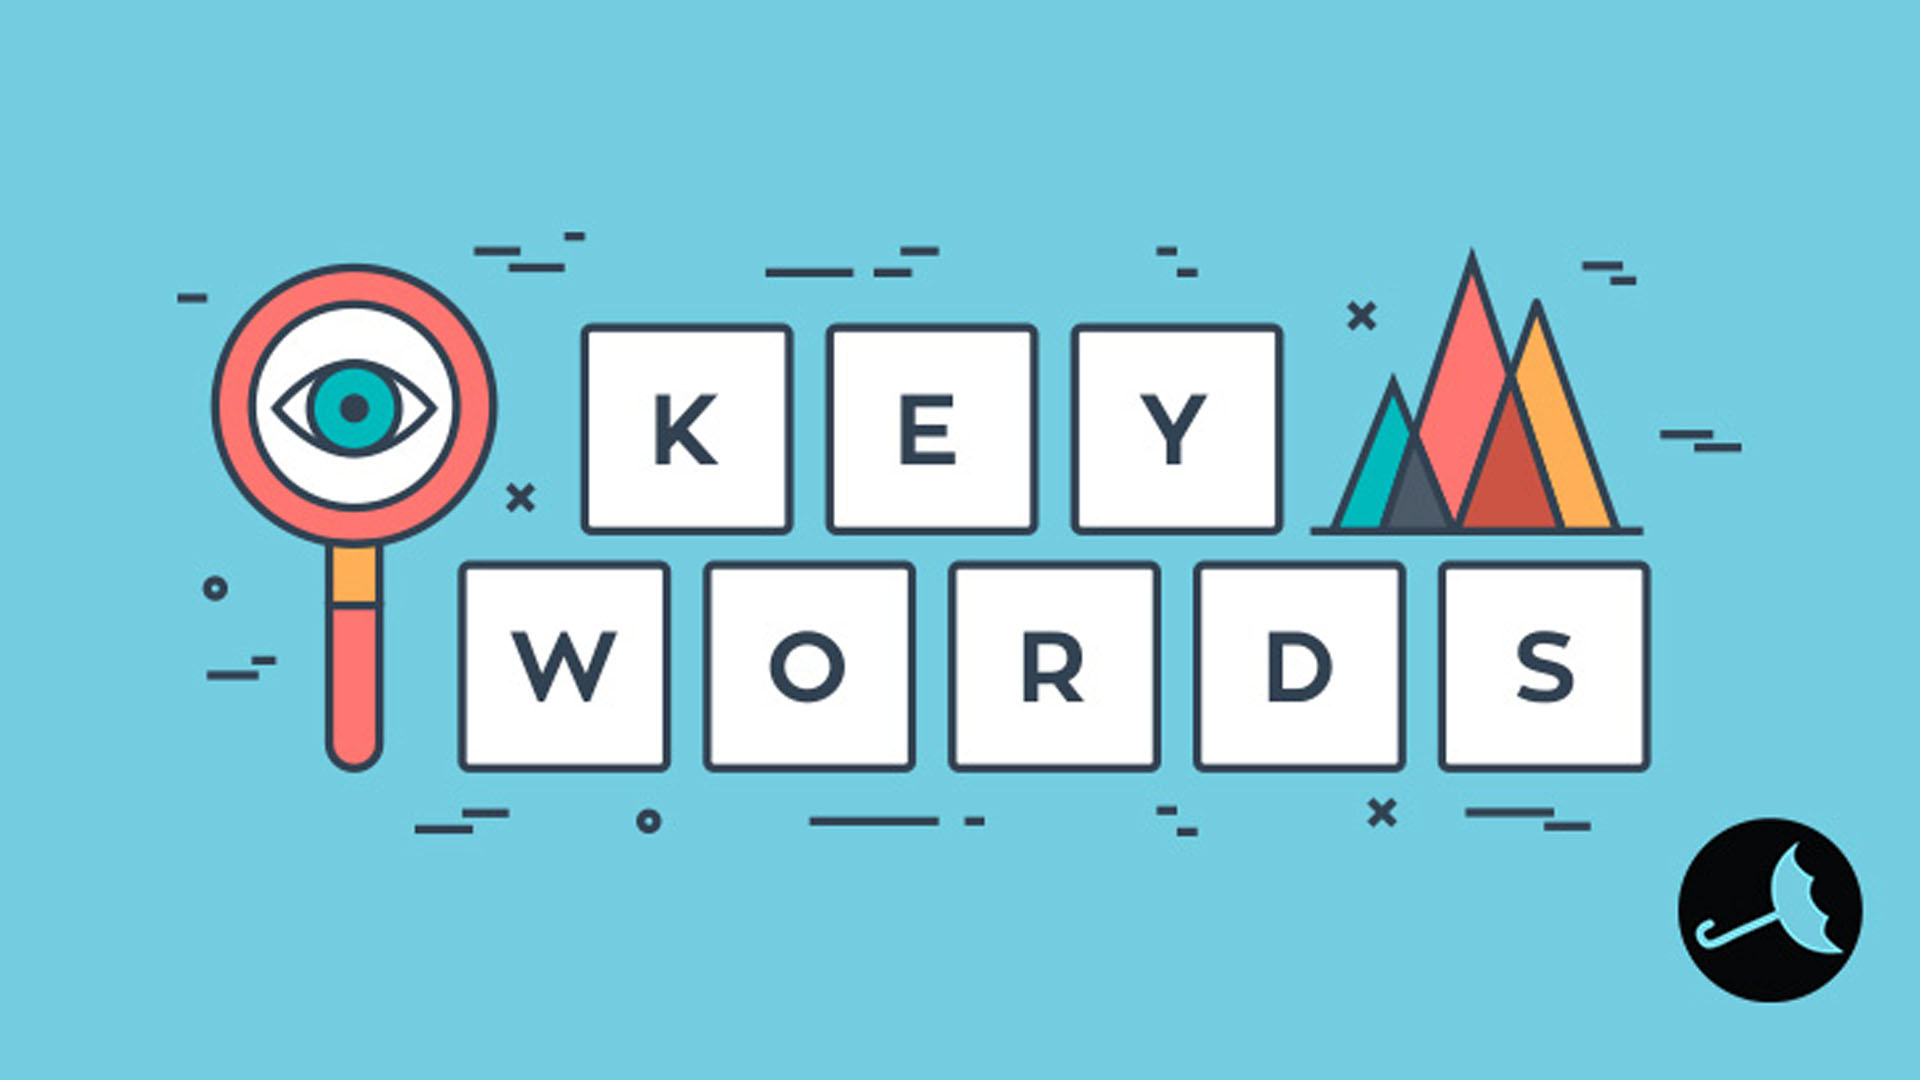 Incorporate keywords into your content